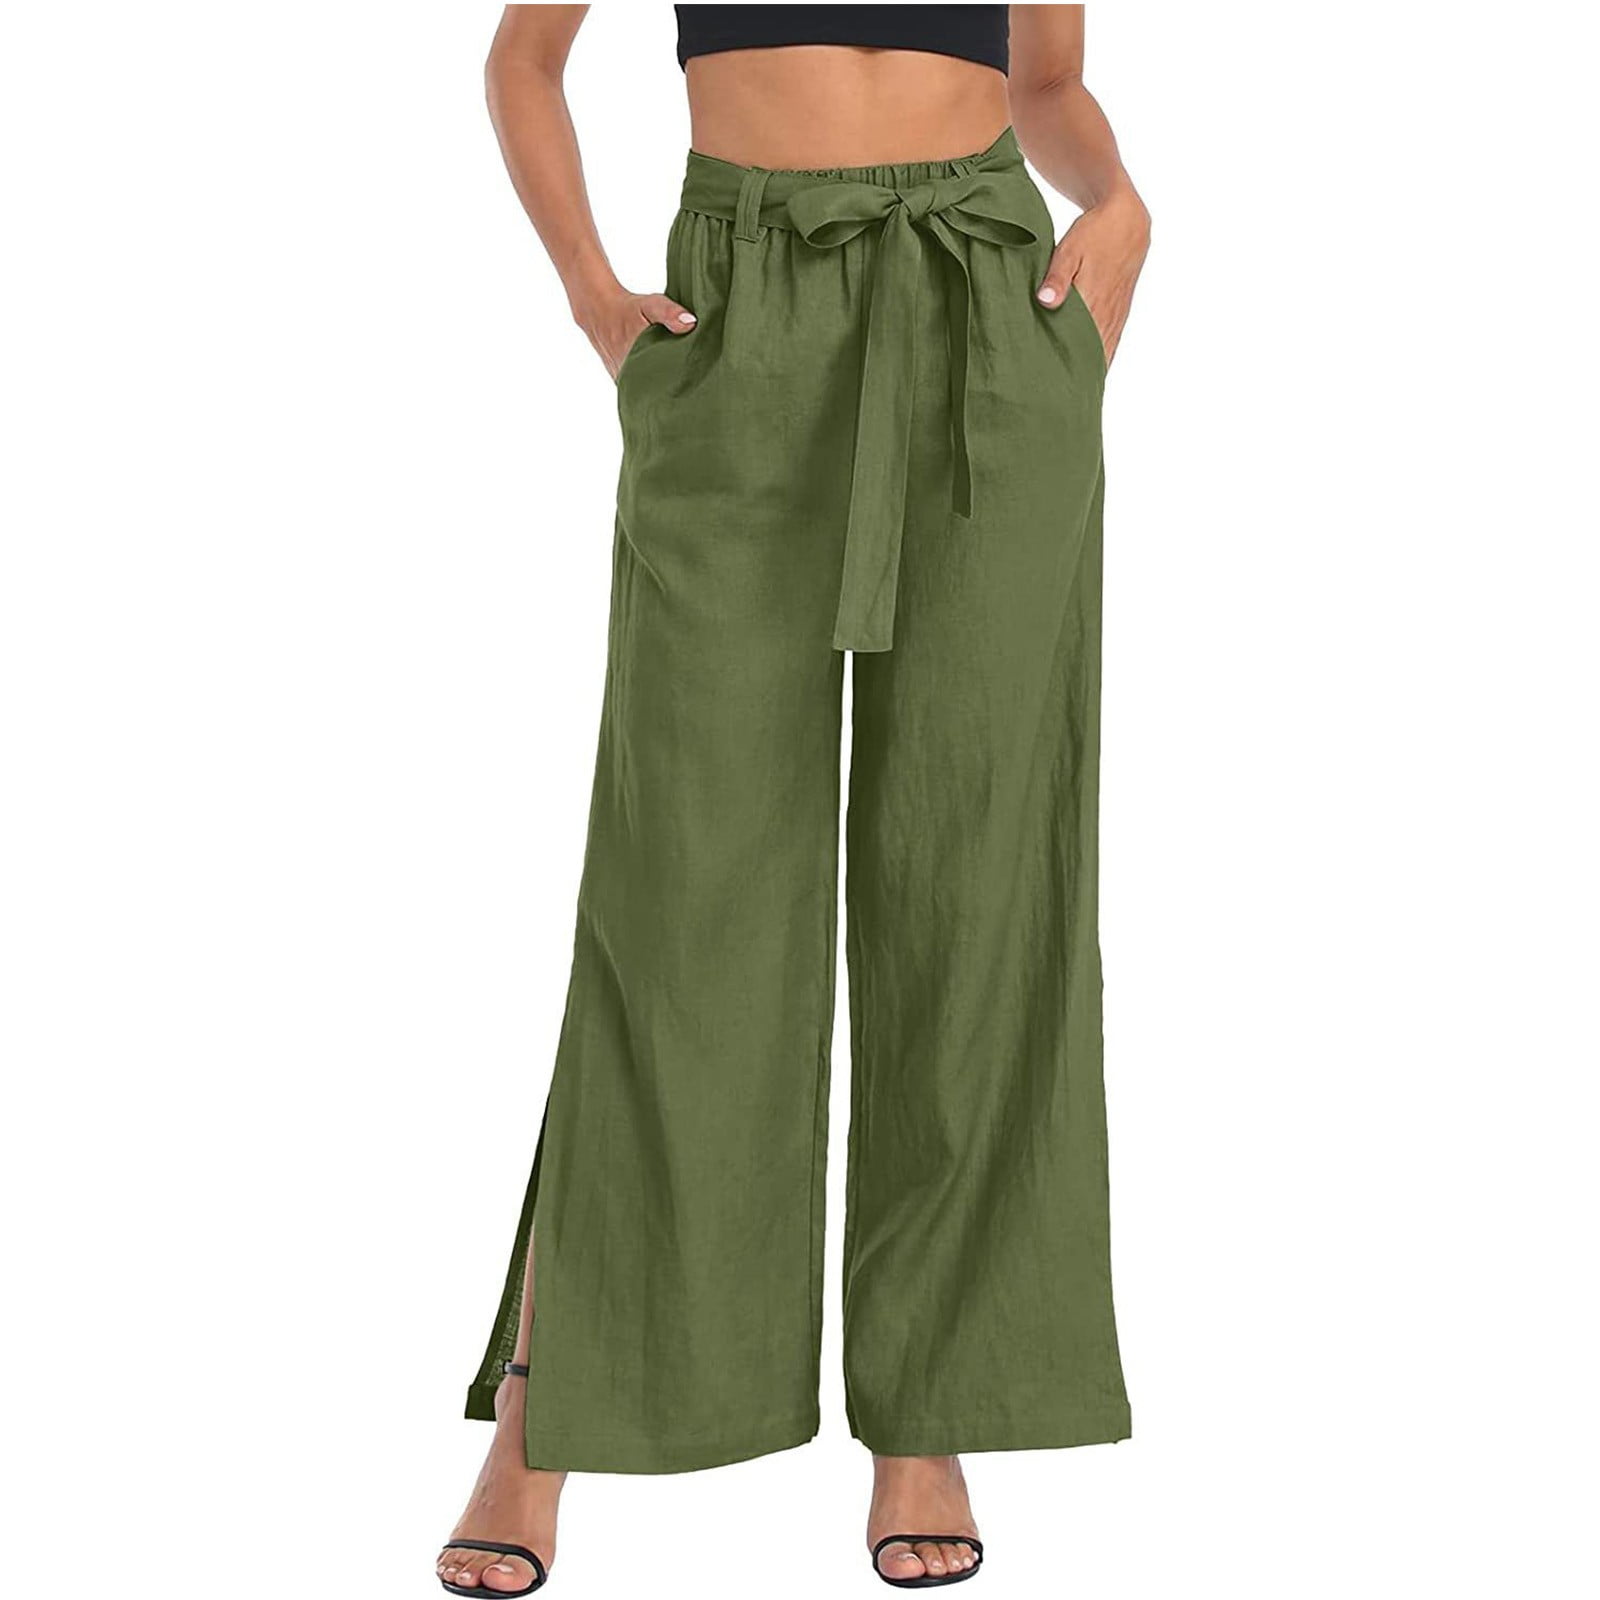 XFLWAM Women's Wide Leg Tie Front Wrap Pants High Waisted Loose Palazzo  Pants Summer Beach Pants with Pockets Green S